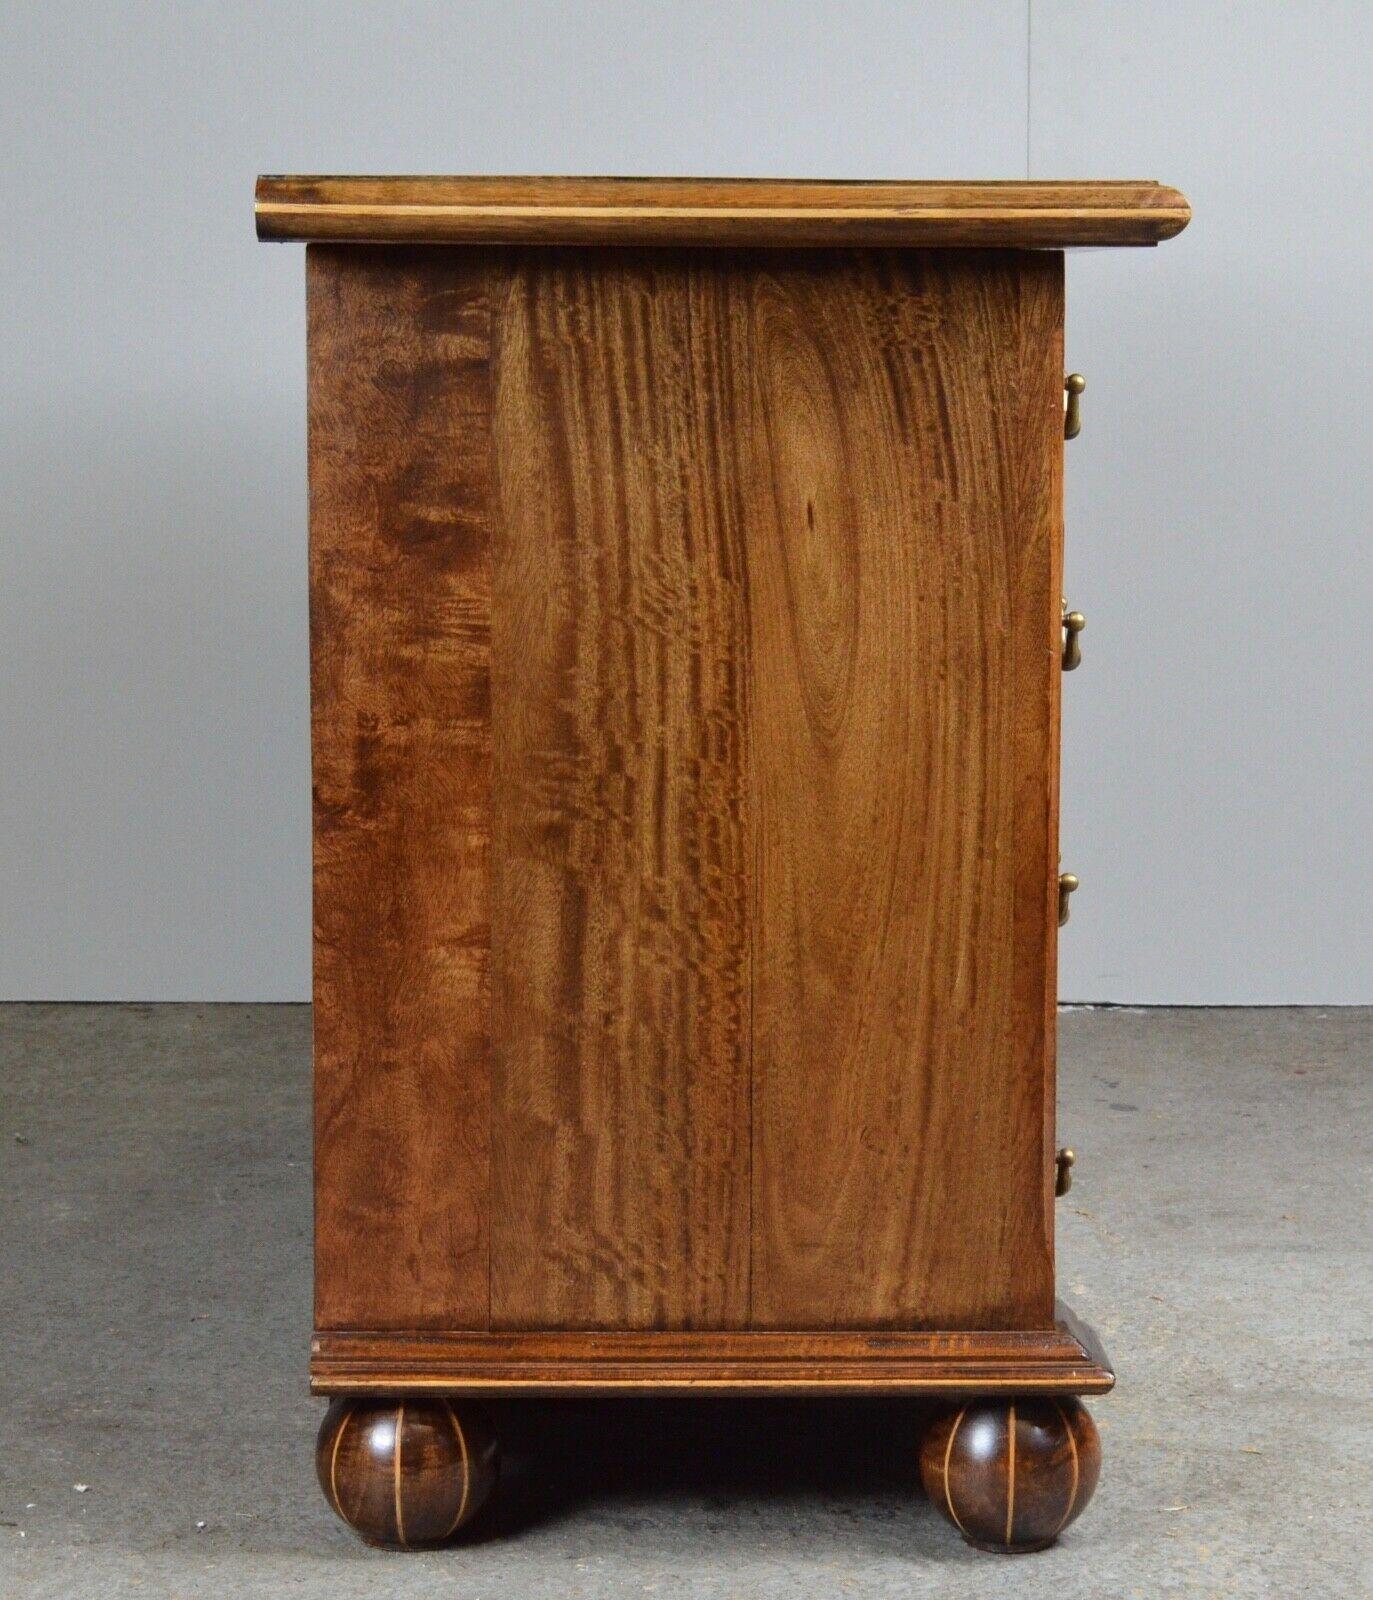 Country Quality Antique Walnut Parquetry Inlaid Hardwood Sideboard /Table&Ch Available For Sale